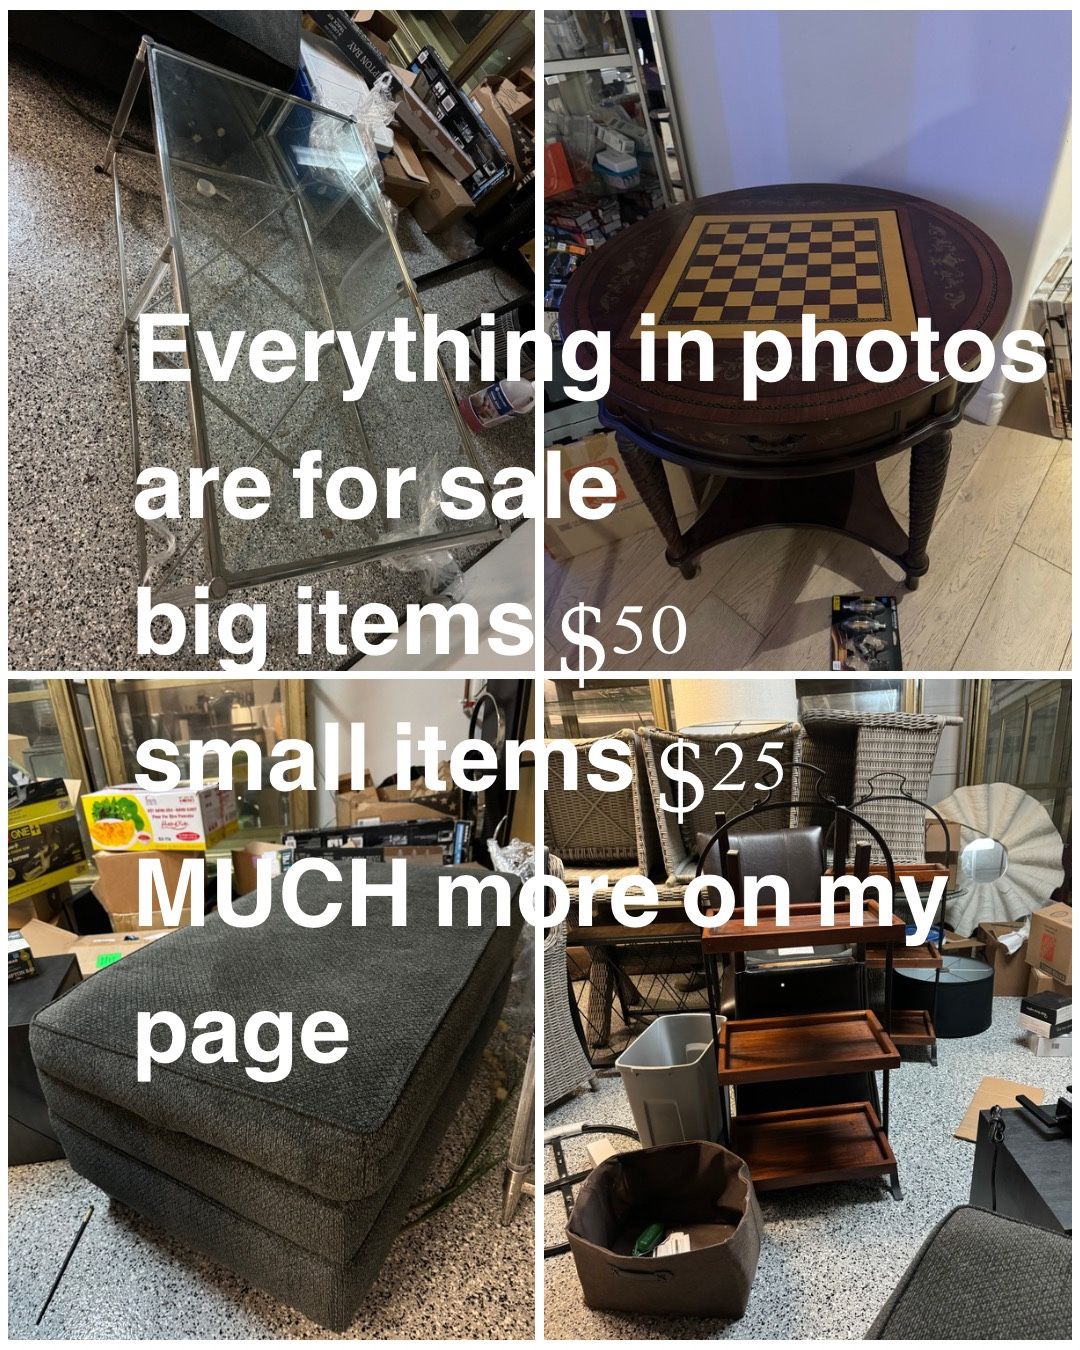 All big items $50 and small items $25